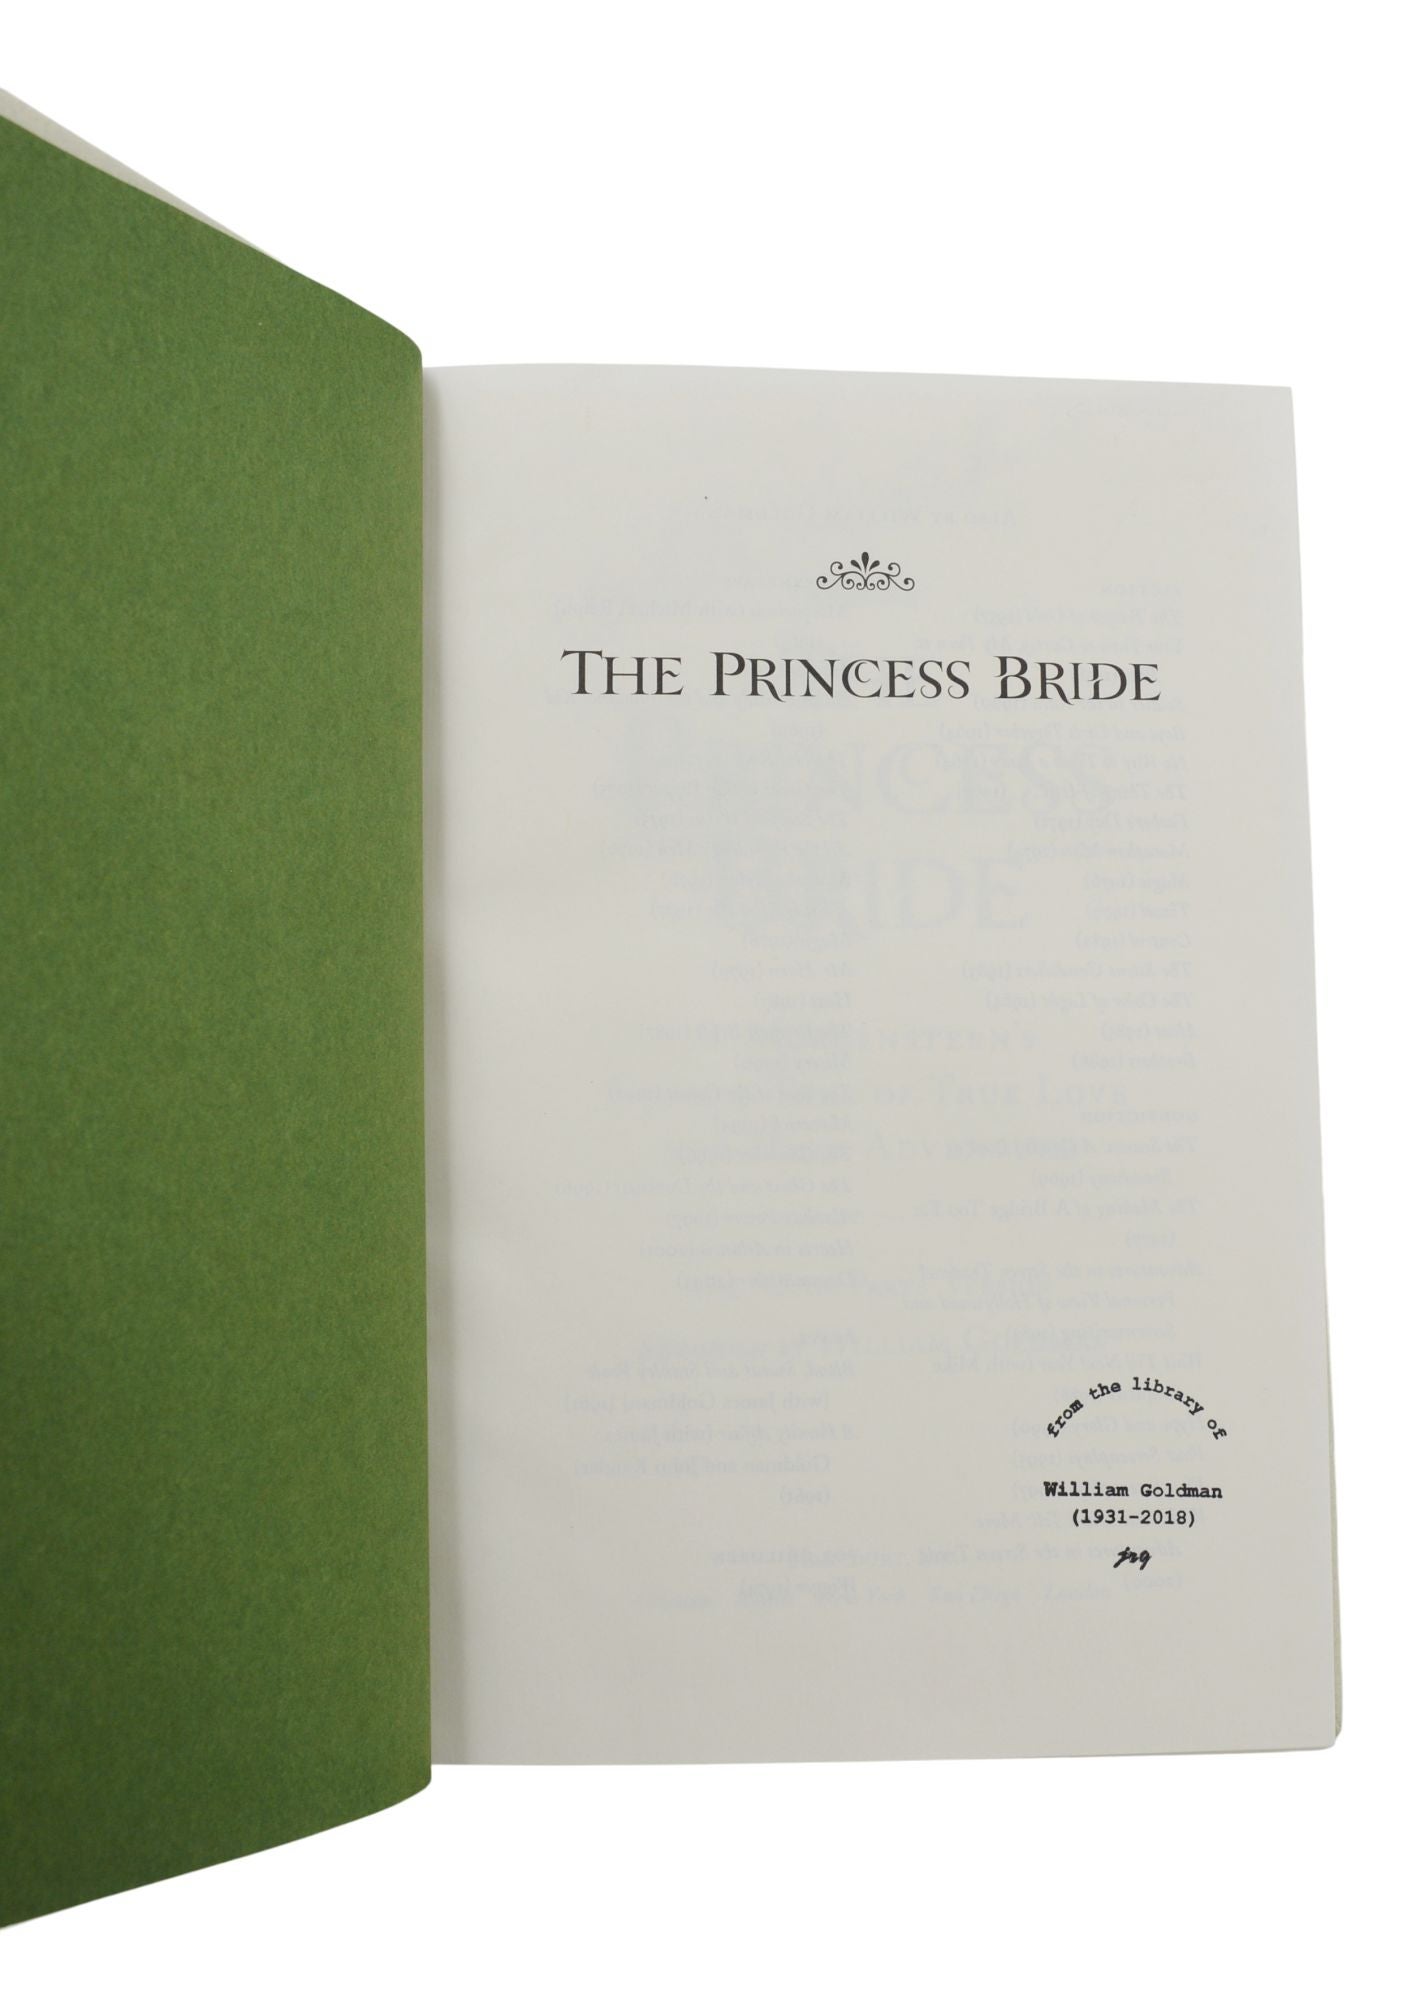 The Princess Bride: An Illustrated Edition of S. Morgenstern's Classic Tale  of True Love and High Adventure